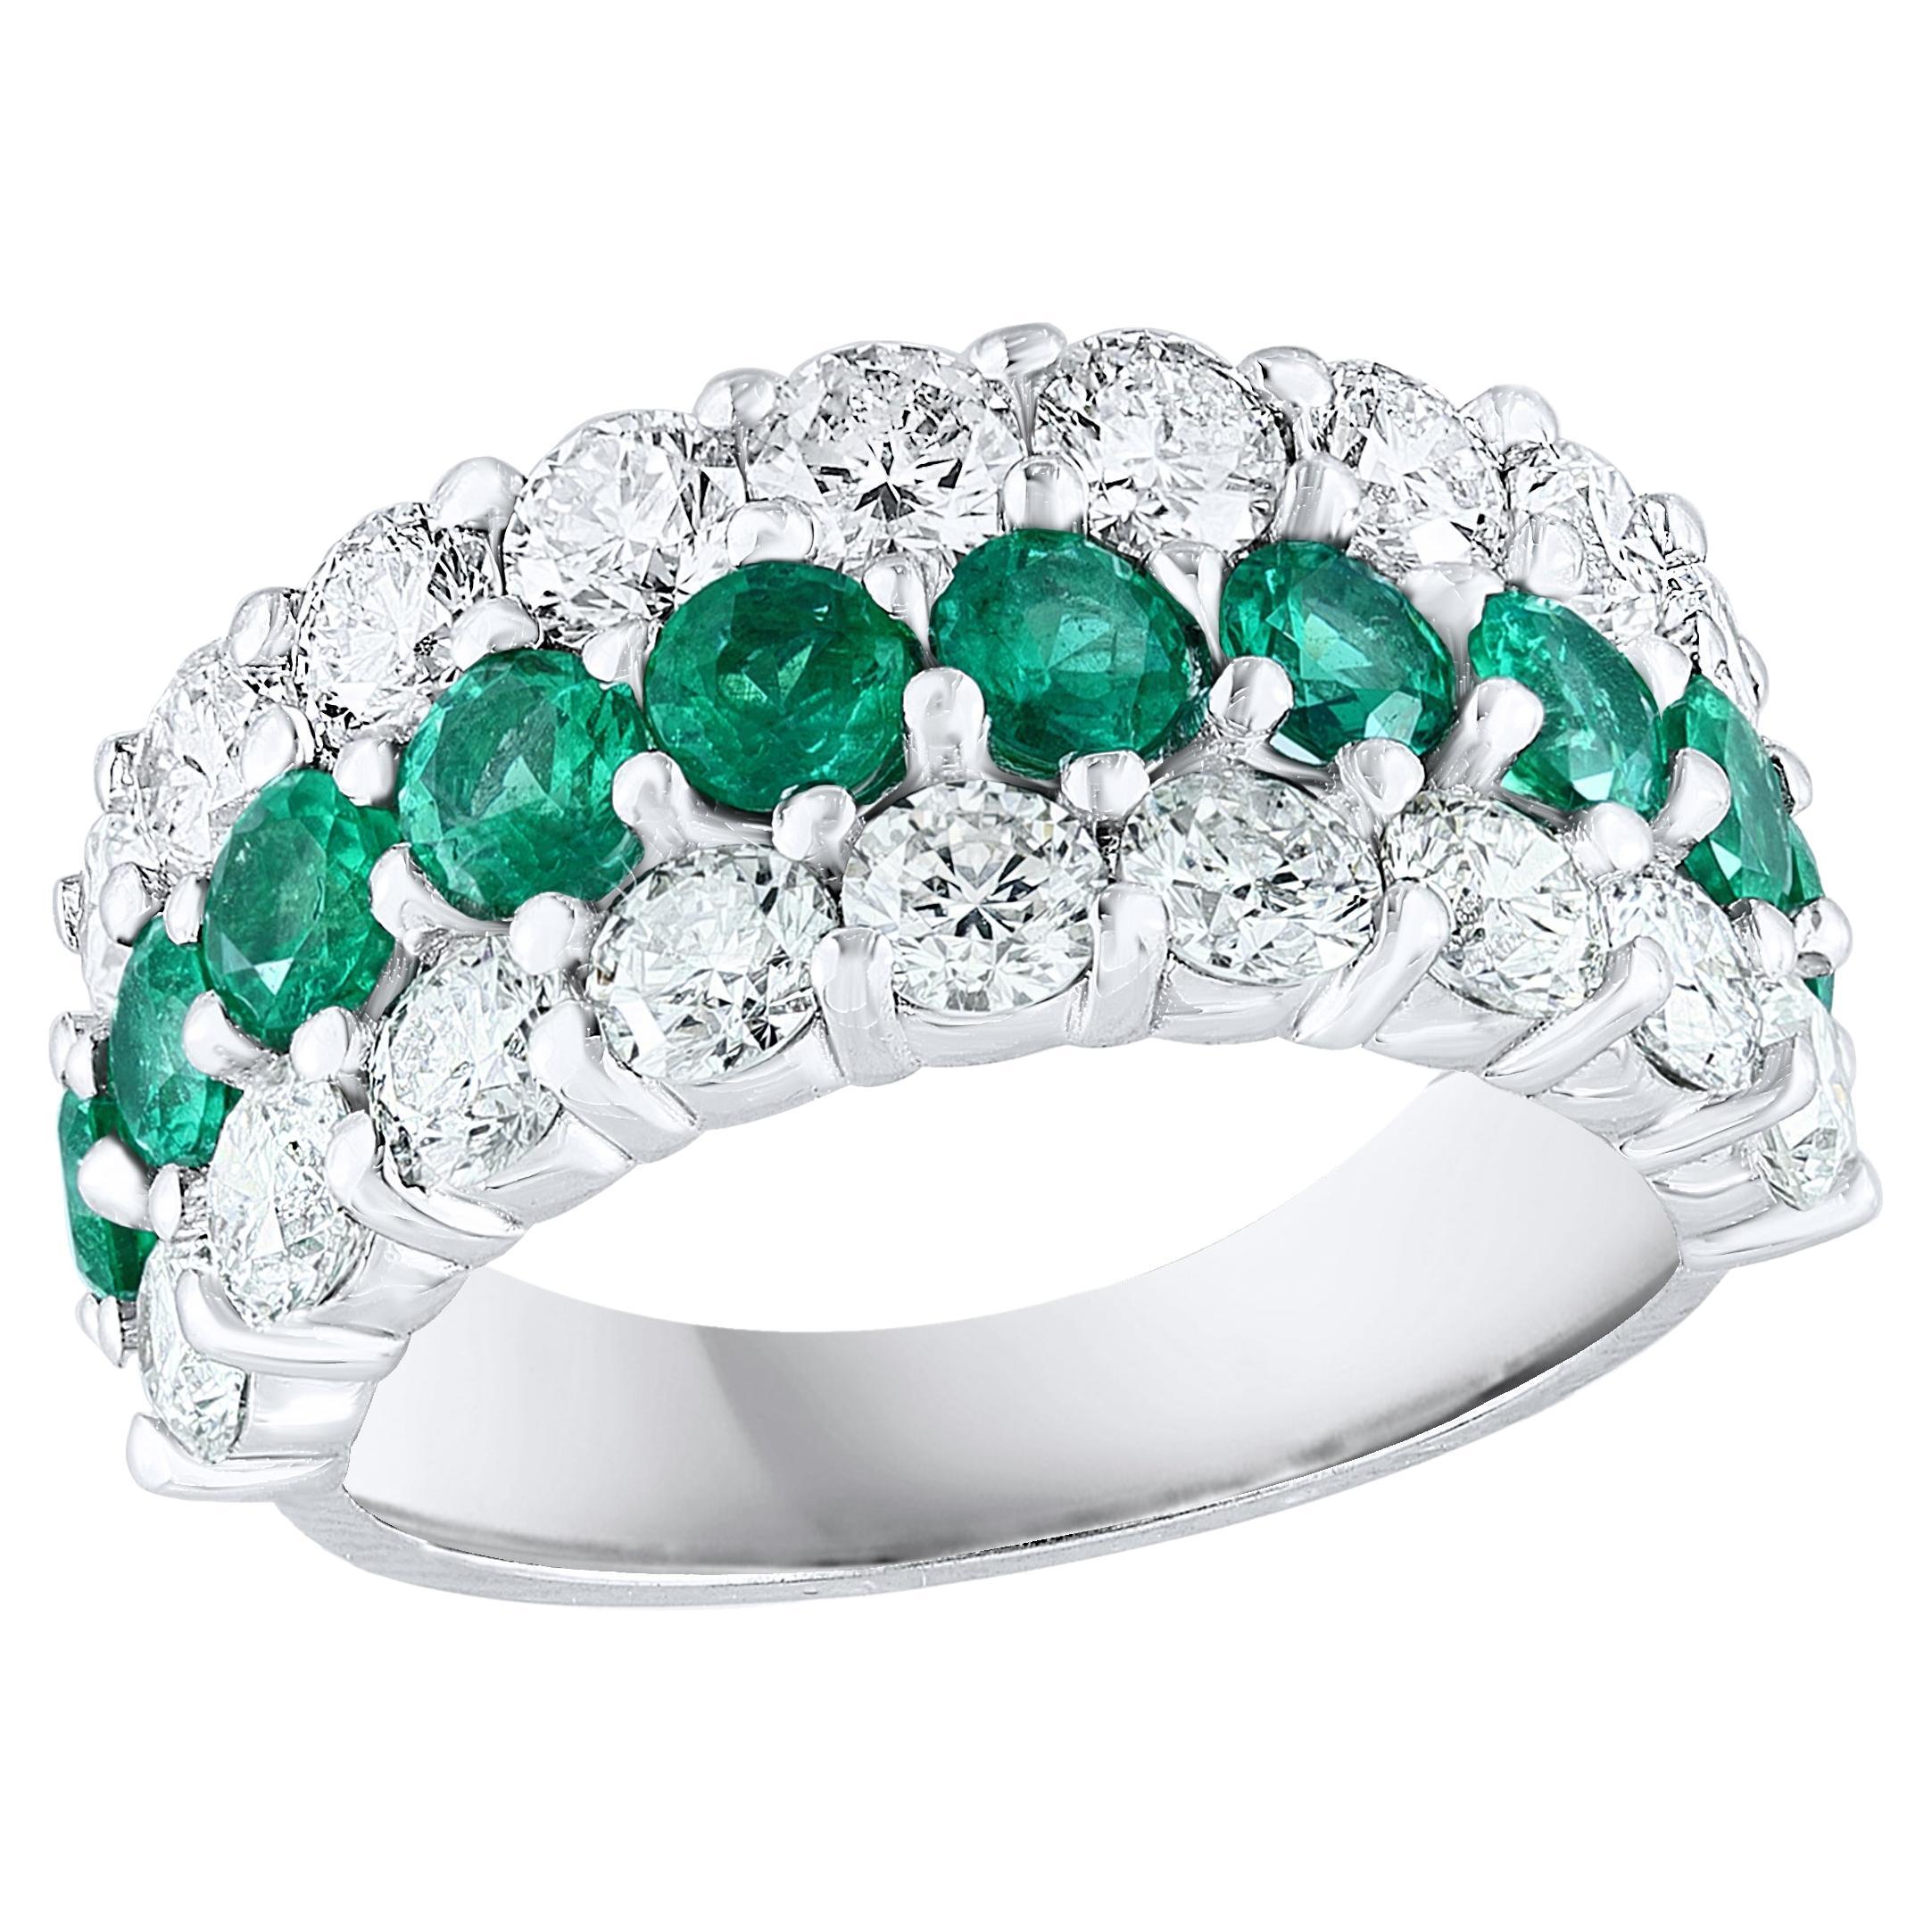 1.29 Ct Round Shape Emerald and Diamond Three Row Band Ring in 14K White Gold